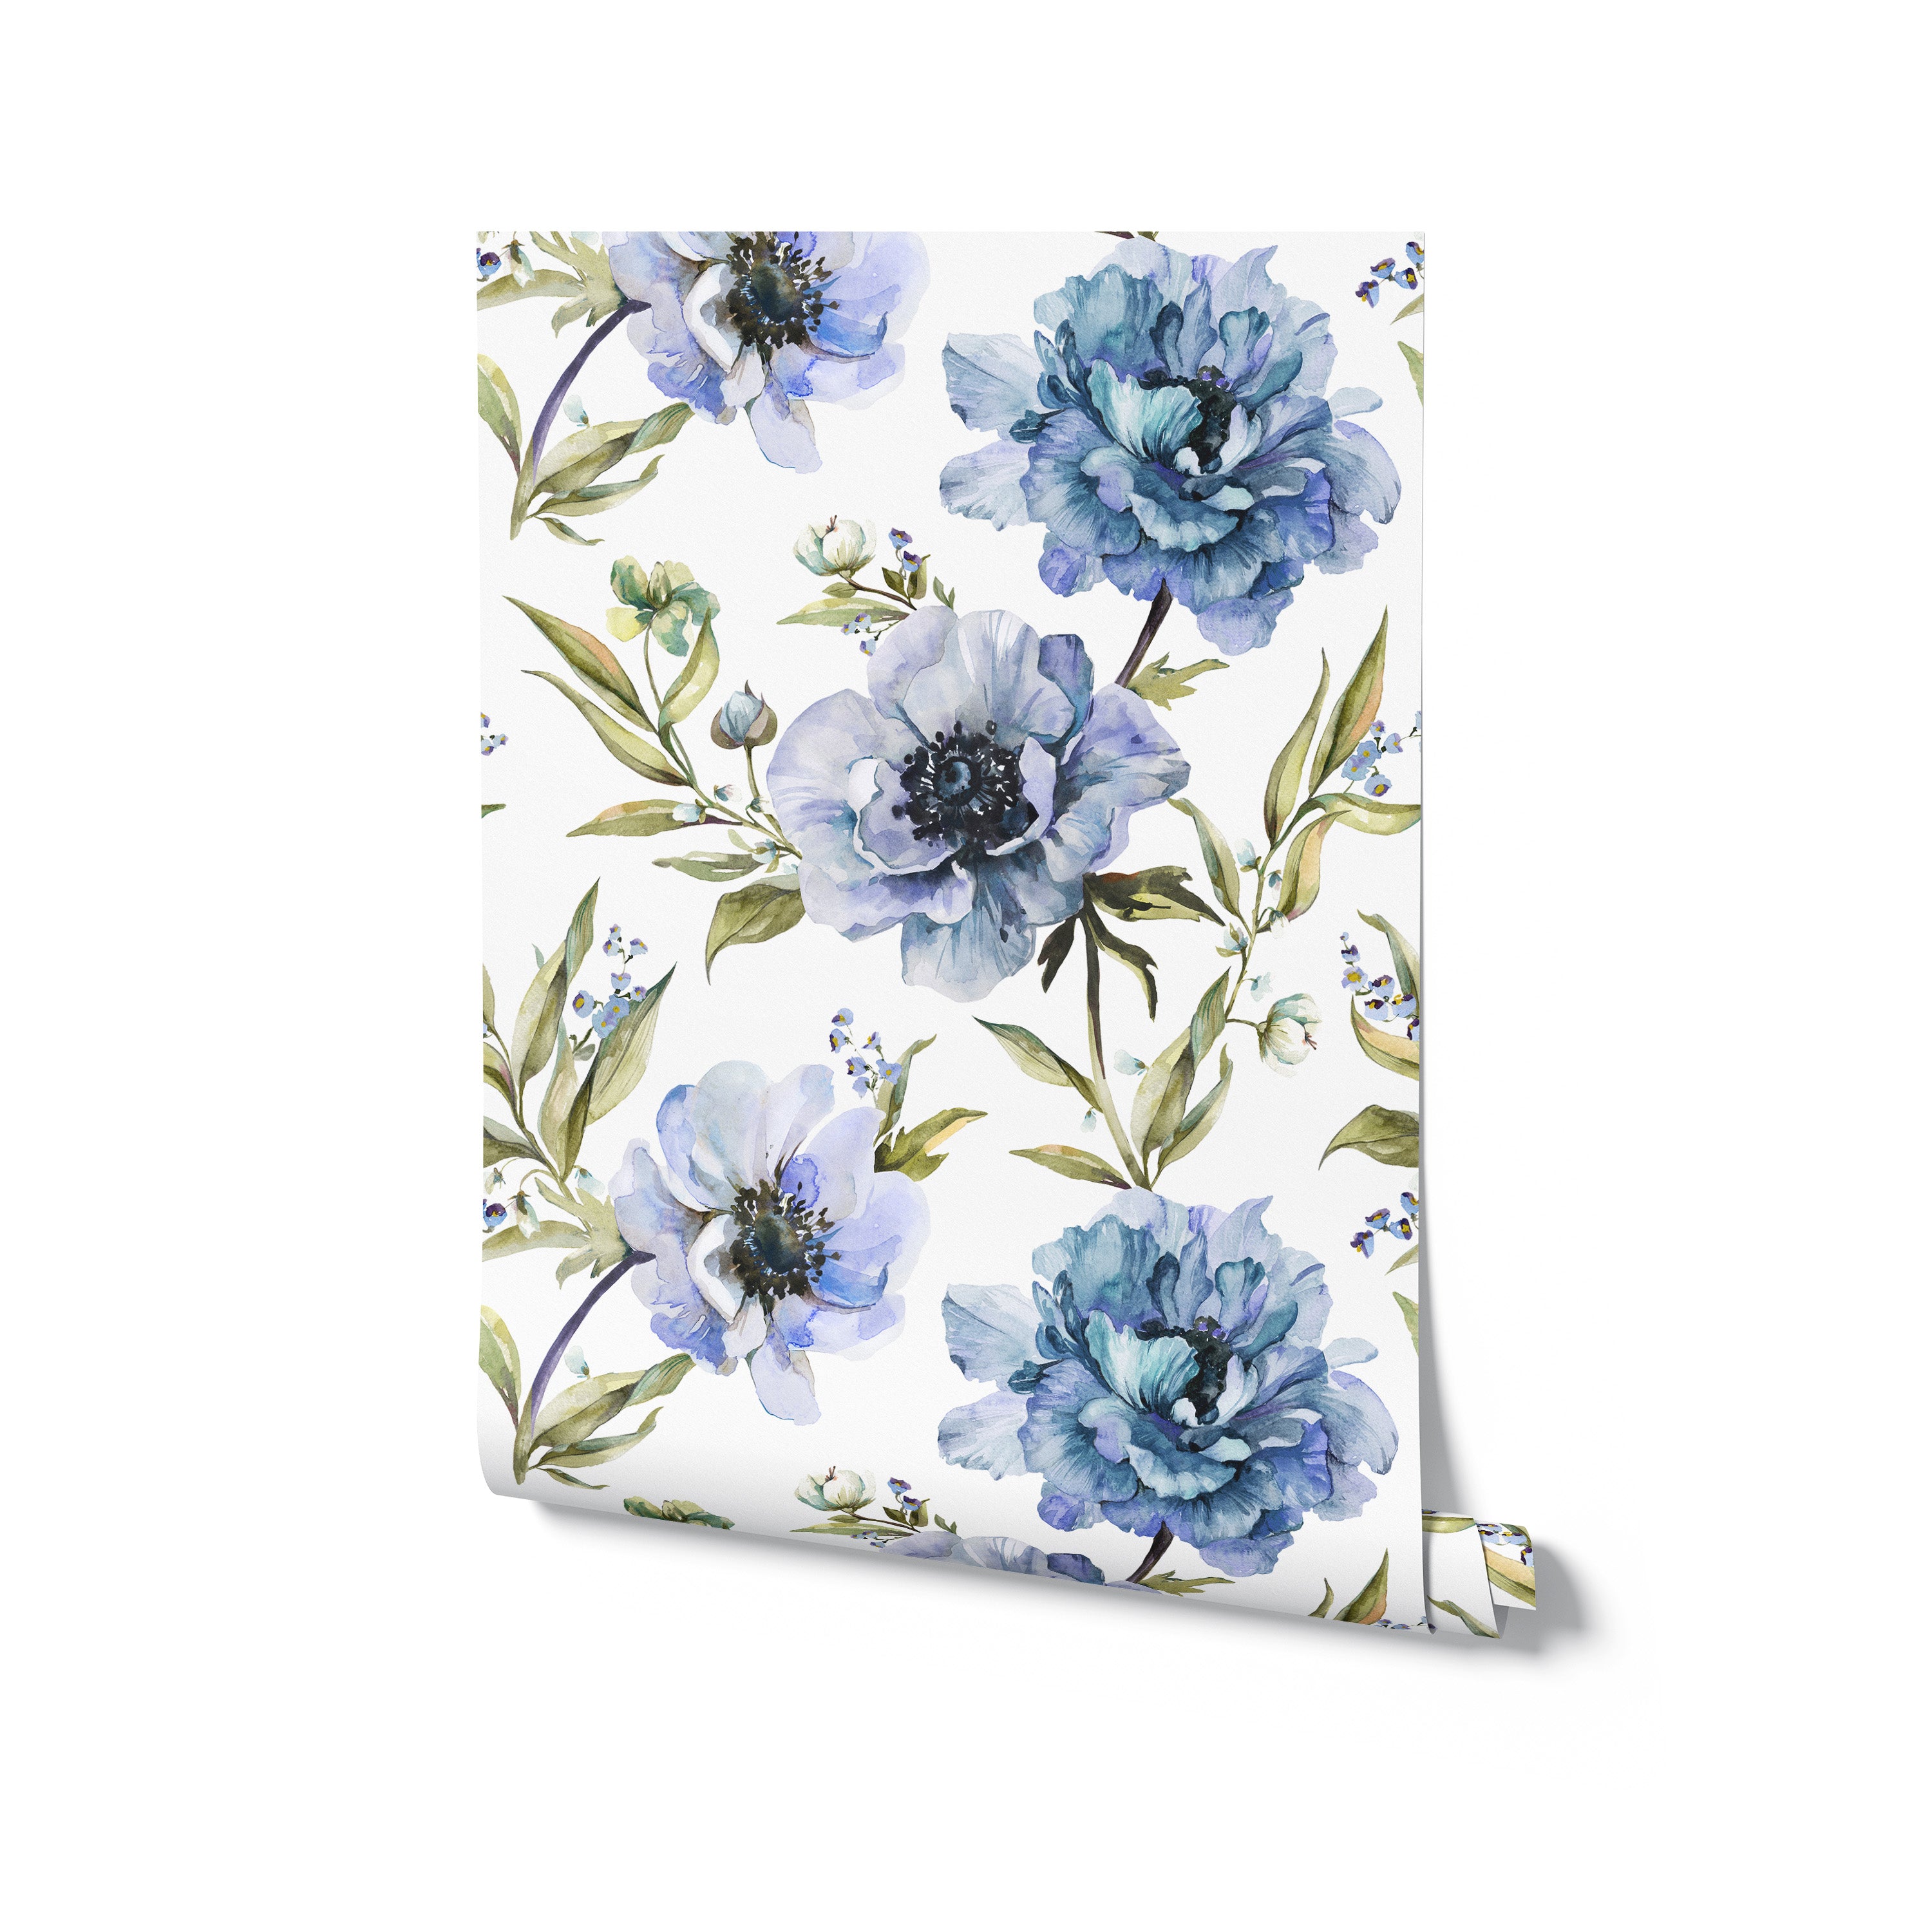 A roll of Indigo Floral Wallpaper featuring large, artistic indigo flowers and lush greenery, ideal for bringing a vibrant, botanical feel to any room.